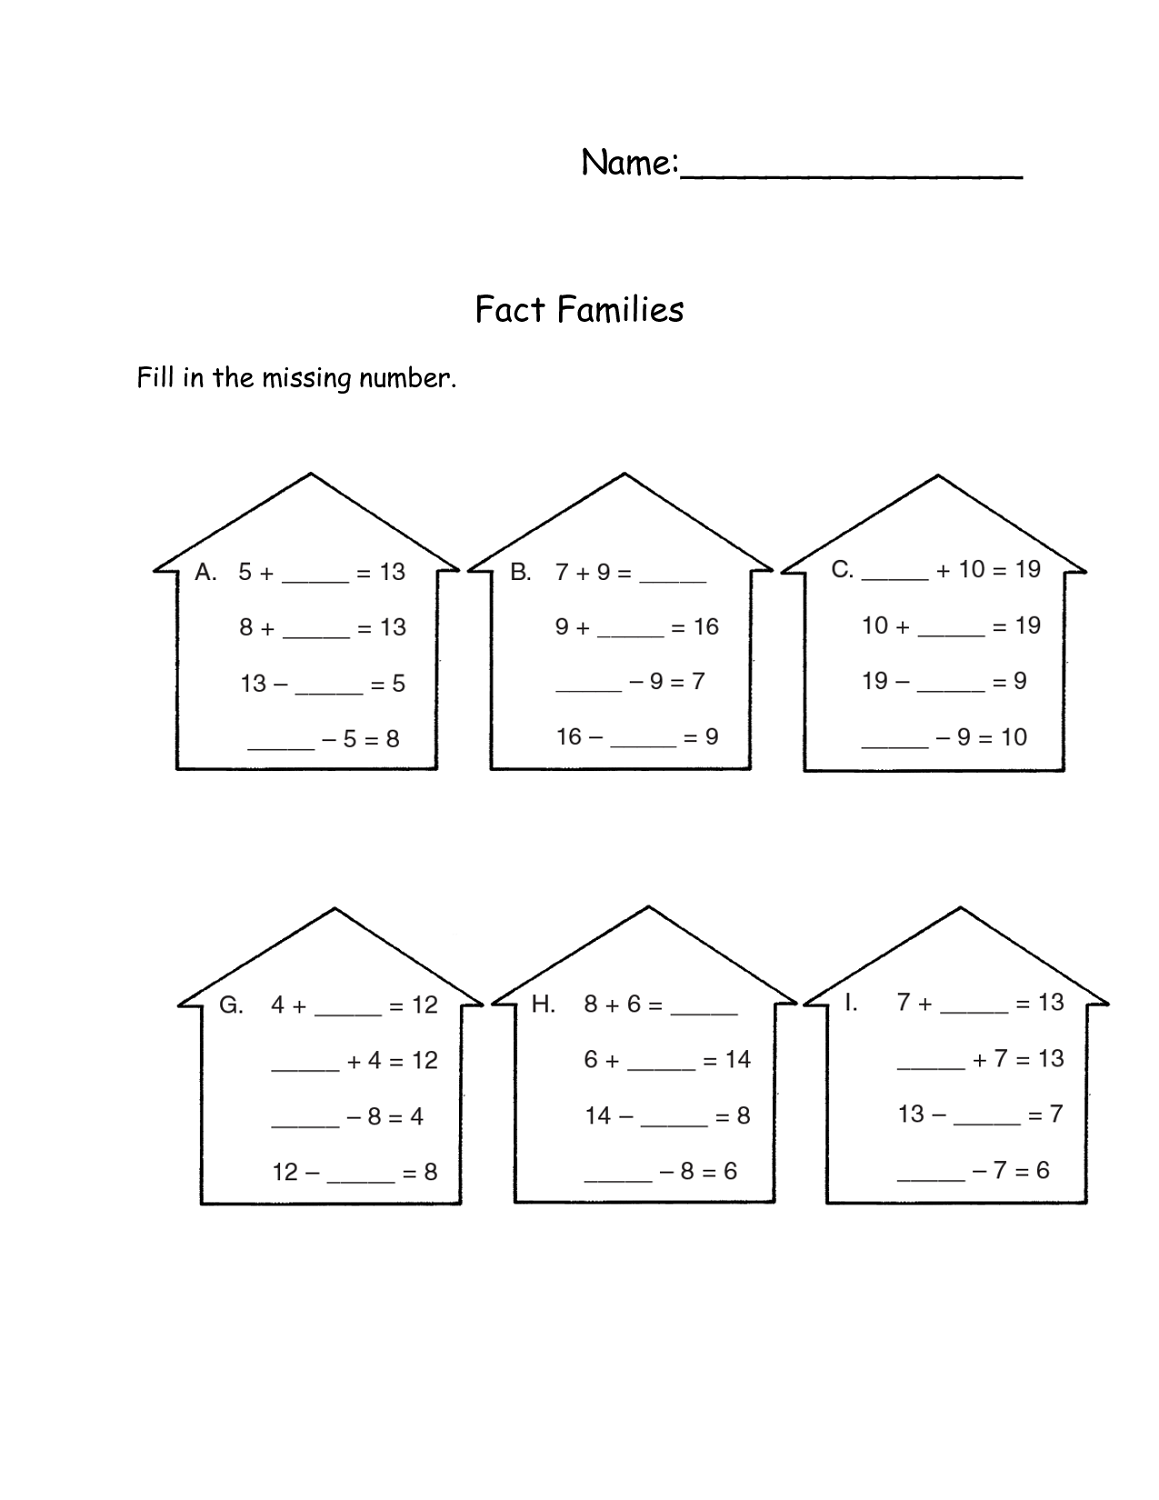 fact families worksheets for kids